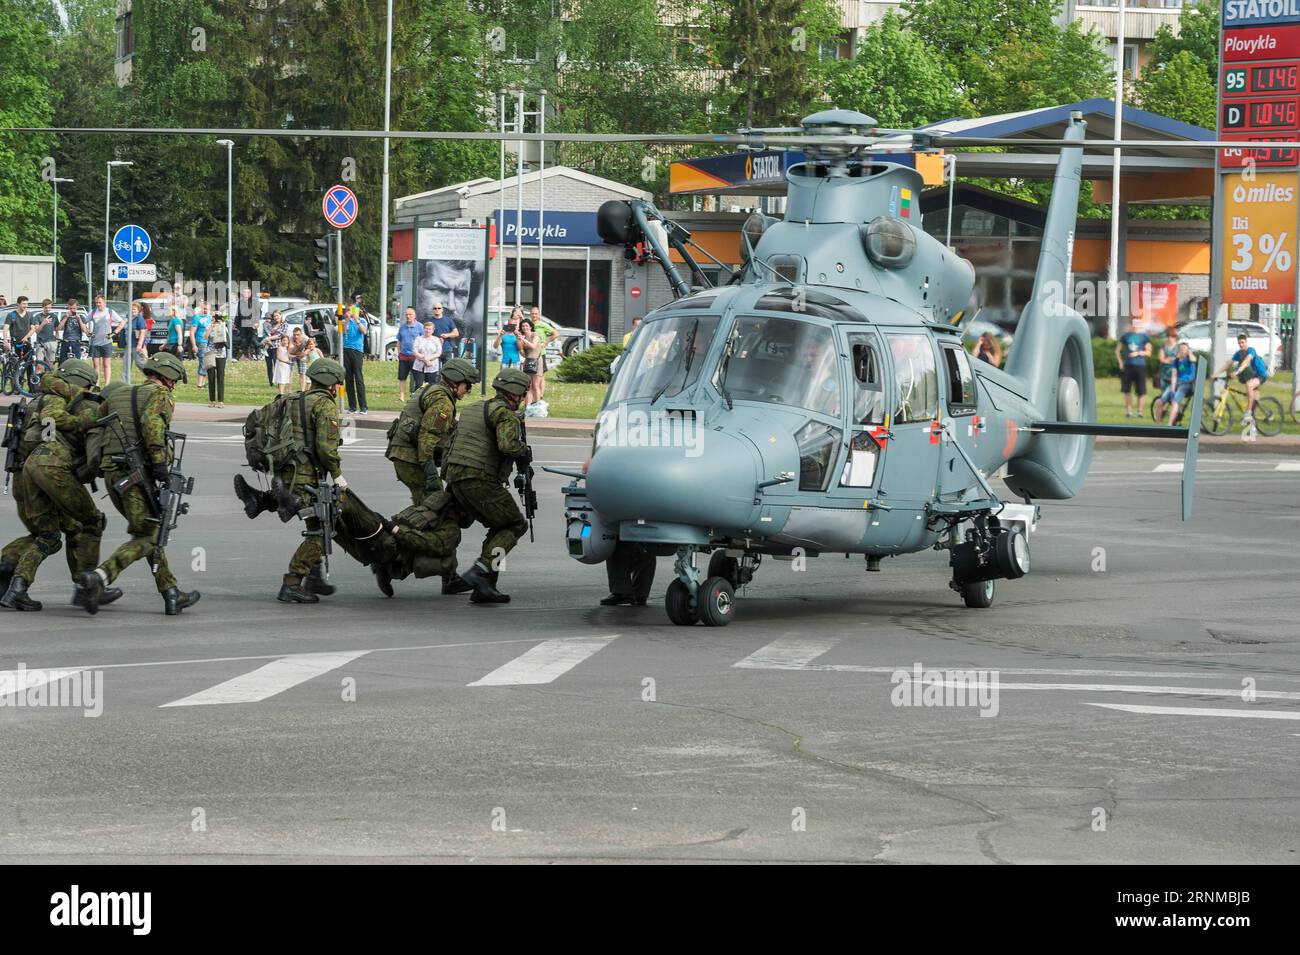 (170520) -- VILNIUS, May 20, 2017 -- Soldiers show the public how to carry the wounded to the helicopter in Panevezys, northern city of Lithuania, May 20, 2017. Lithuania celebrated Armed Forces and Public Unity Day in northern city of Panevezys on Saturday. ) LITHUANIA-PANEVEZYS-ARMED FORCES AND PUBLIC UNITY DAY AlfredasxPliadis PUBLICATIONxNOTxINxCHN   Vilnius May 20 2017 Soldiers Show The Public How to Carry The Wounded to The Helicopter in Panevezys Northern City of Lithuania May 20 2017 Lithuania celebrated Armed Forces and Public Unity Day in Northern City of Panevezys ON Saturday Lithua Stock Photo